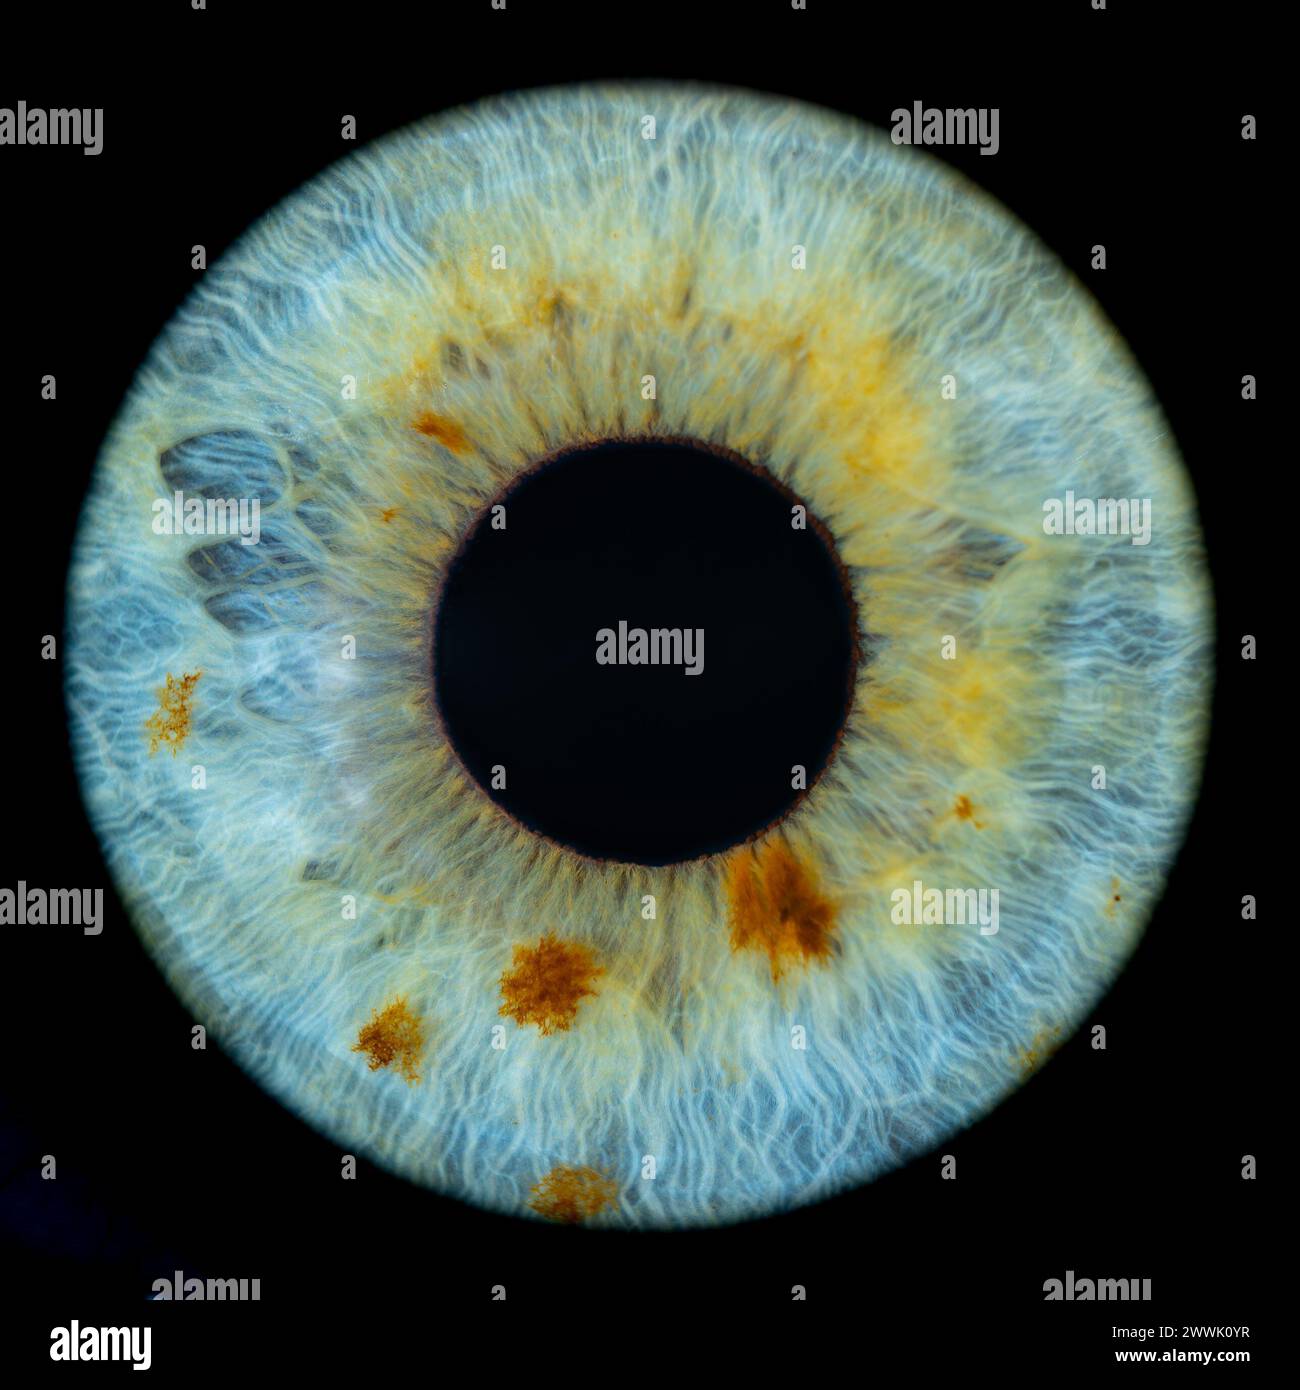 Description: Macro photo of human eye on black background. Close-up of female blue-green colored eye with brown spots. Structural Anatomy. Iris Detail Stock Photo